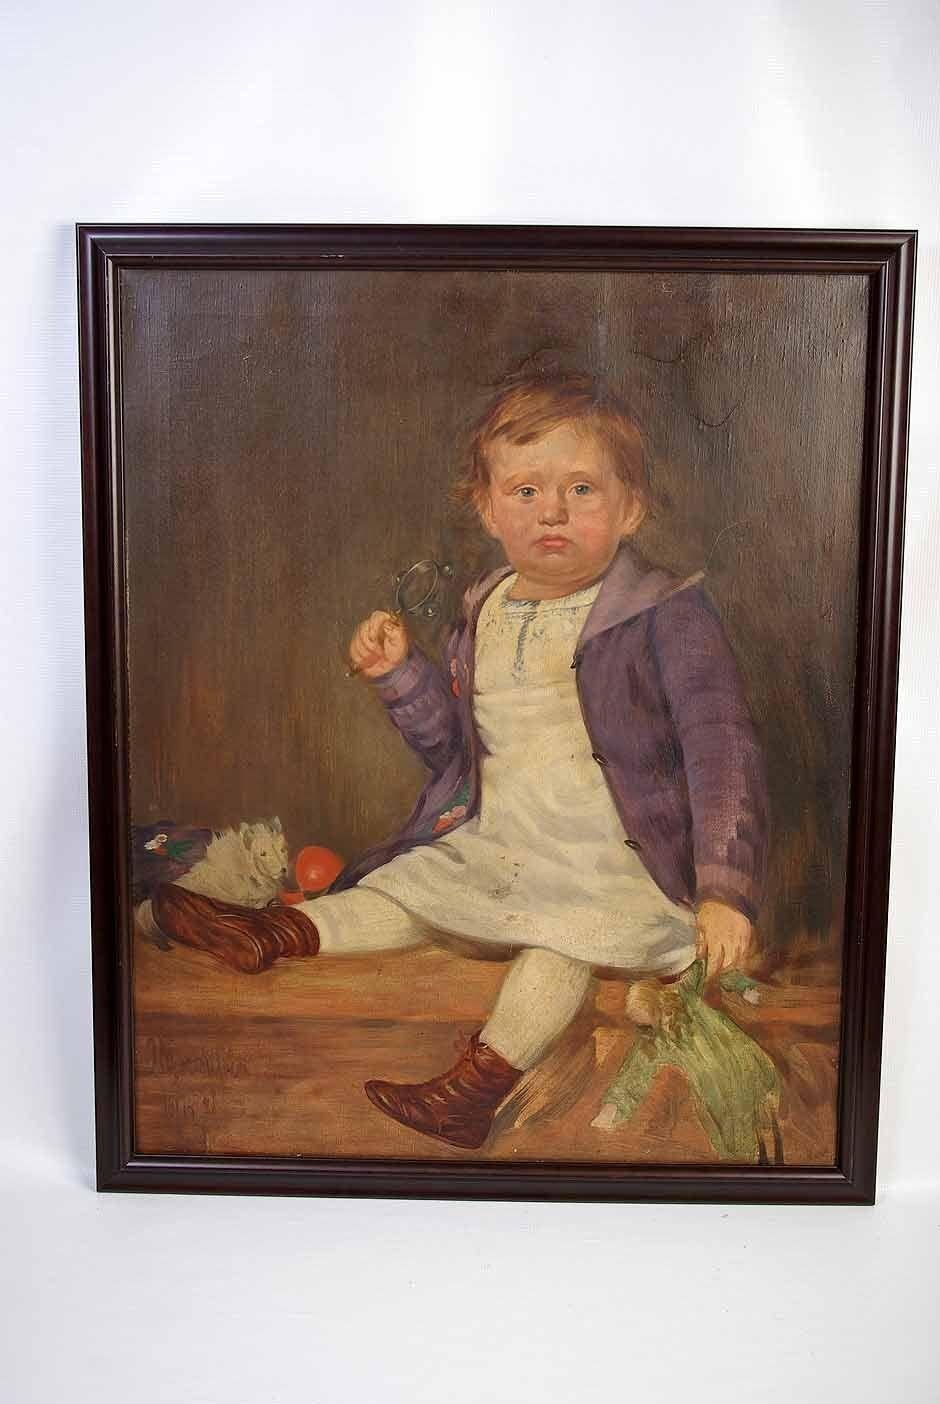 $650
Child in blue jacket
Blue eyes, chubby cheeks
Nicely proportioned oil
Some paint loss
Signed bottom left corner
New frame
Frame: 28